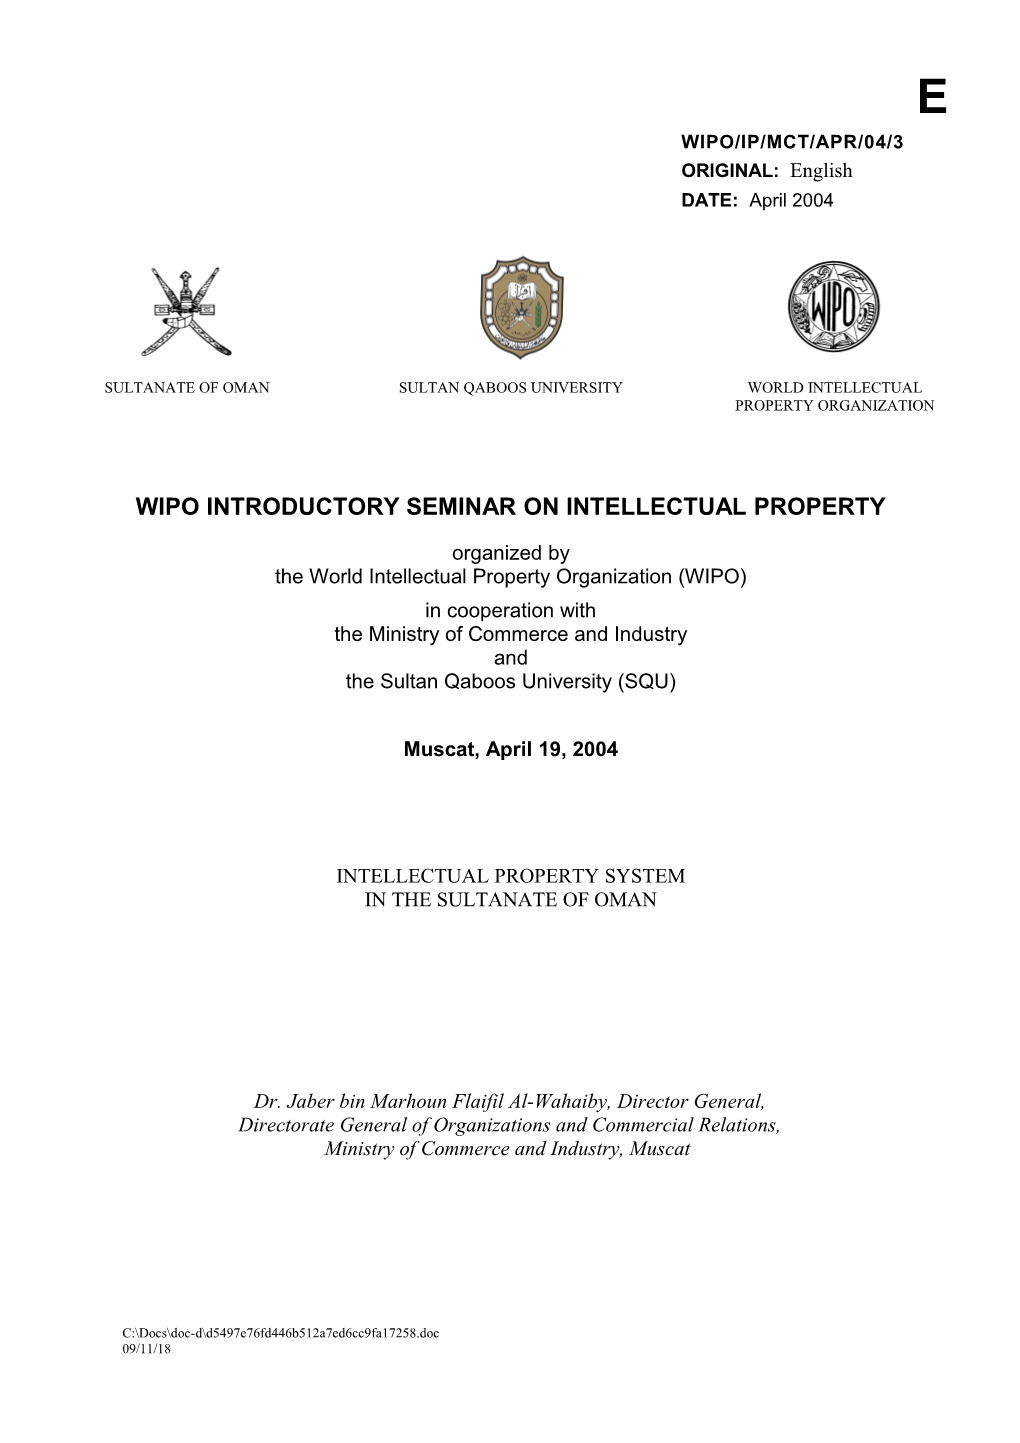 WIPO/IP/MCT/APR/04/3: Intellectual Property System in the Sultanate of Oman